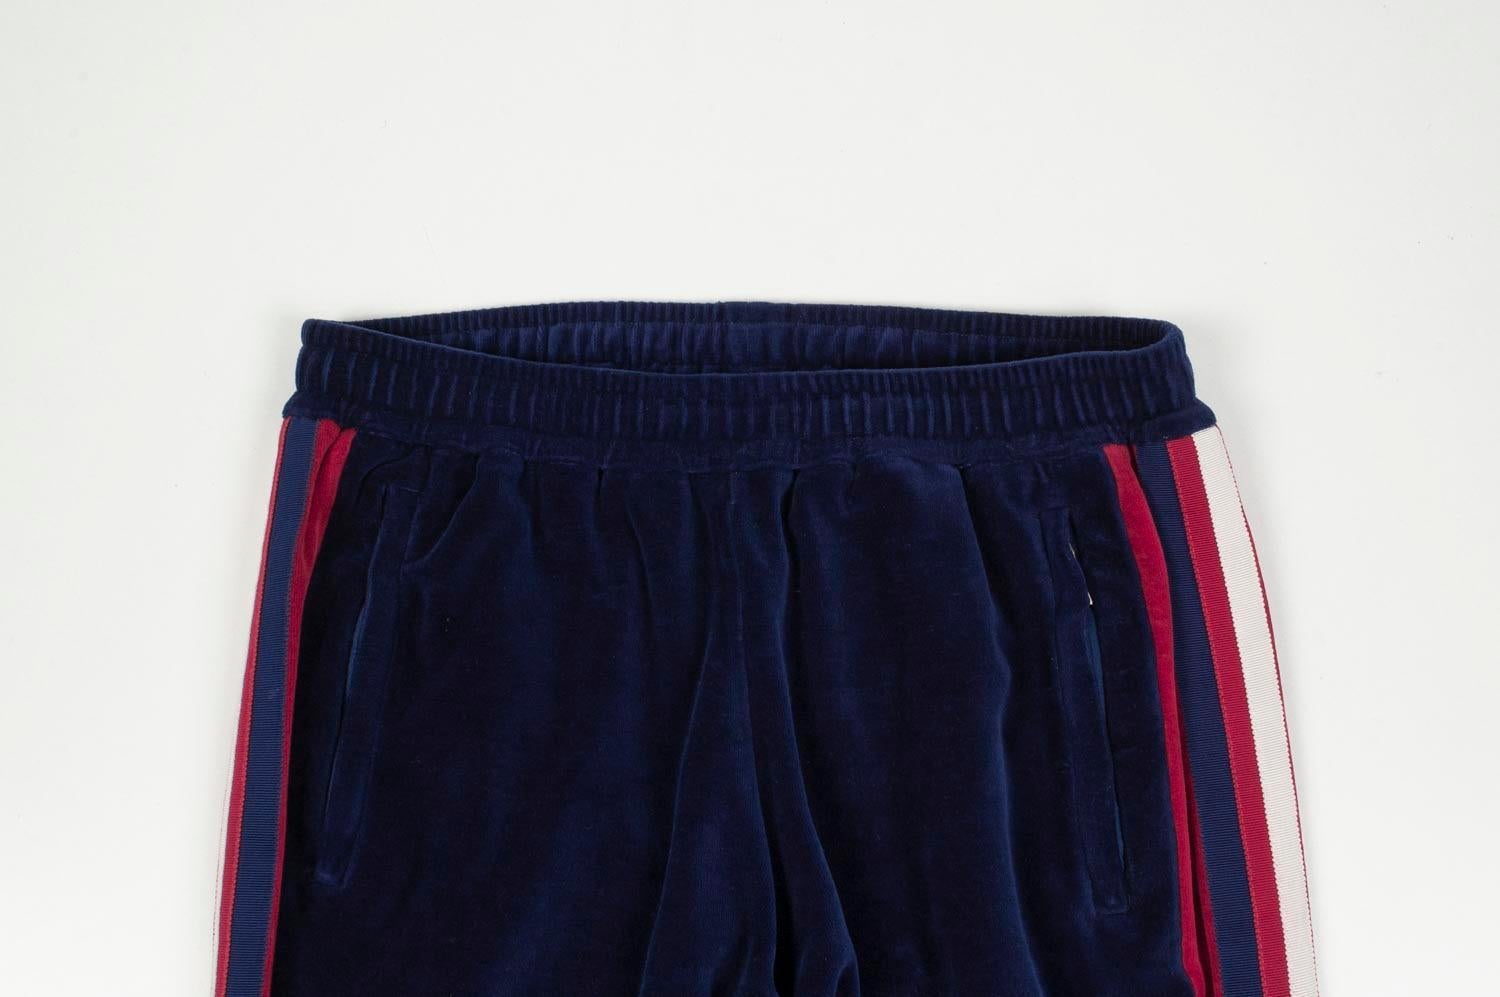 Item for sale is 100% genuine Gucci Velour Men Sweatpants, S284
Color: Blue
(An actual color may a bit vary due to individual computer screen interpretation)
Material: 85% cotton, 15% nylon
Tag size: Small
These pants are great quality item. Rate